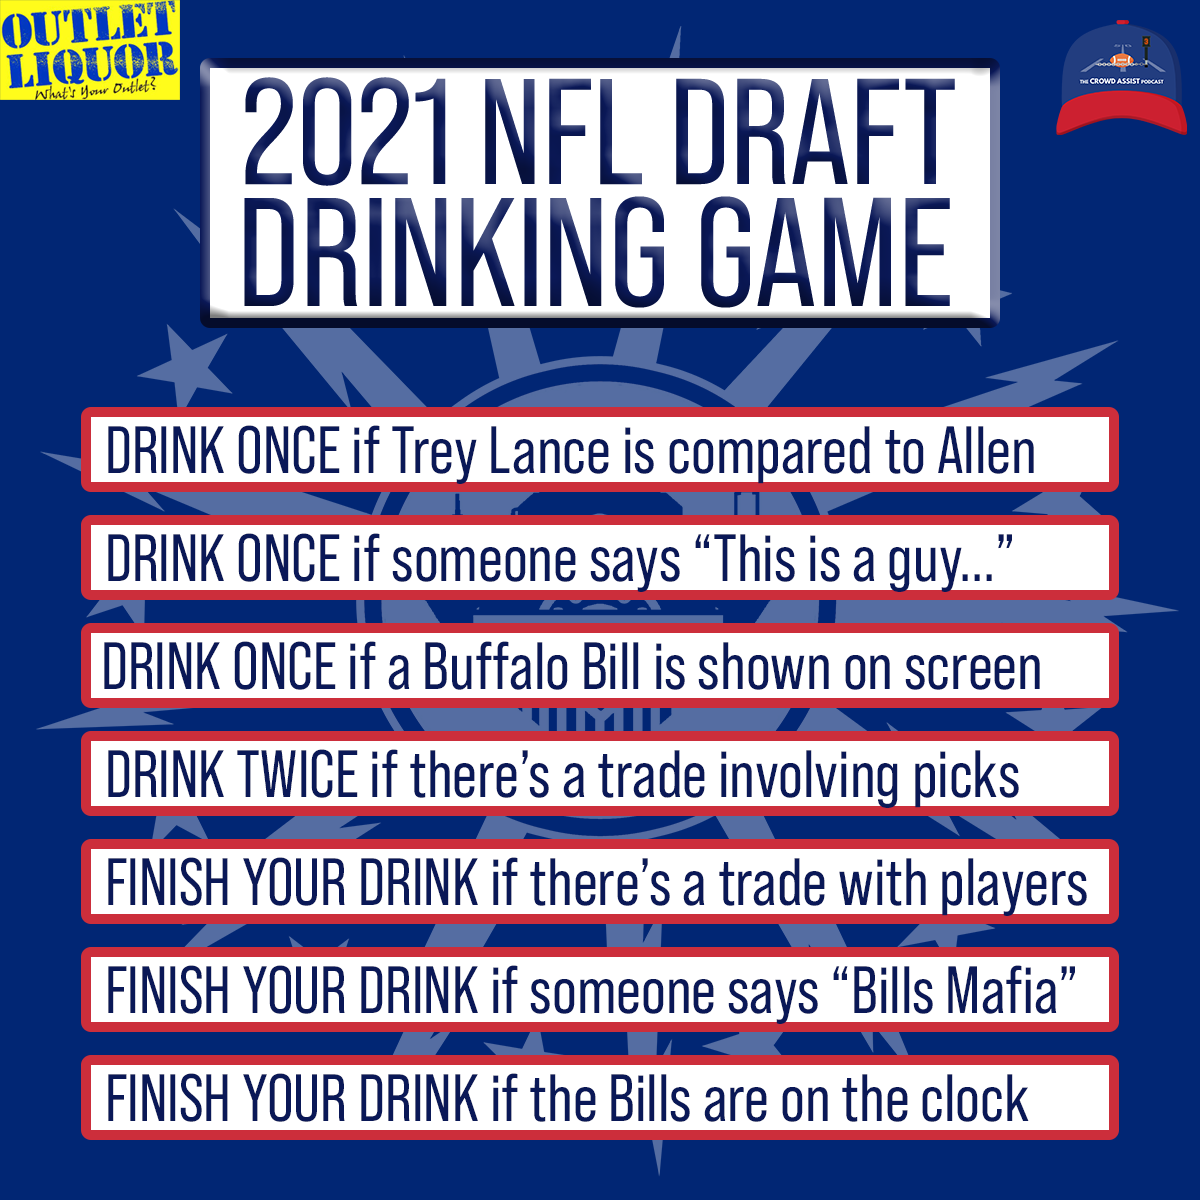 Trainwreck Sports on Twitter: "A 2021 NFL Draft Drinking Game? less. Thanks to @outletliquorny, we're ready to play. Anything we should to this before the draft https://t.co/3M2HB6PYsi" / Twitter